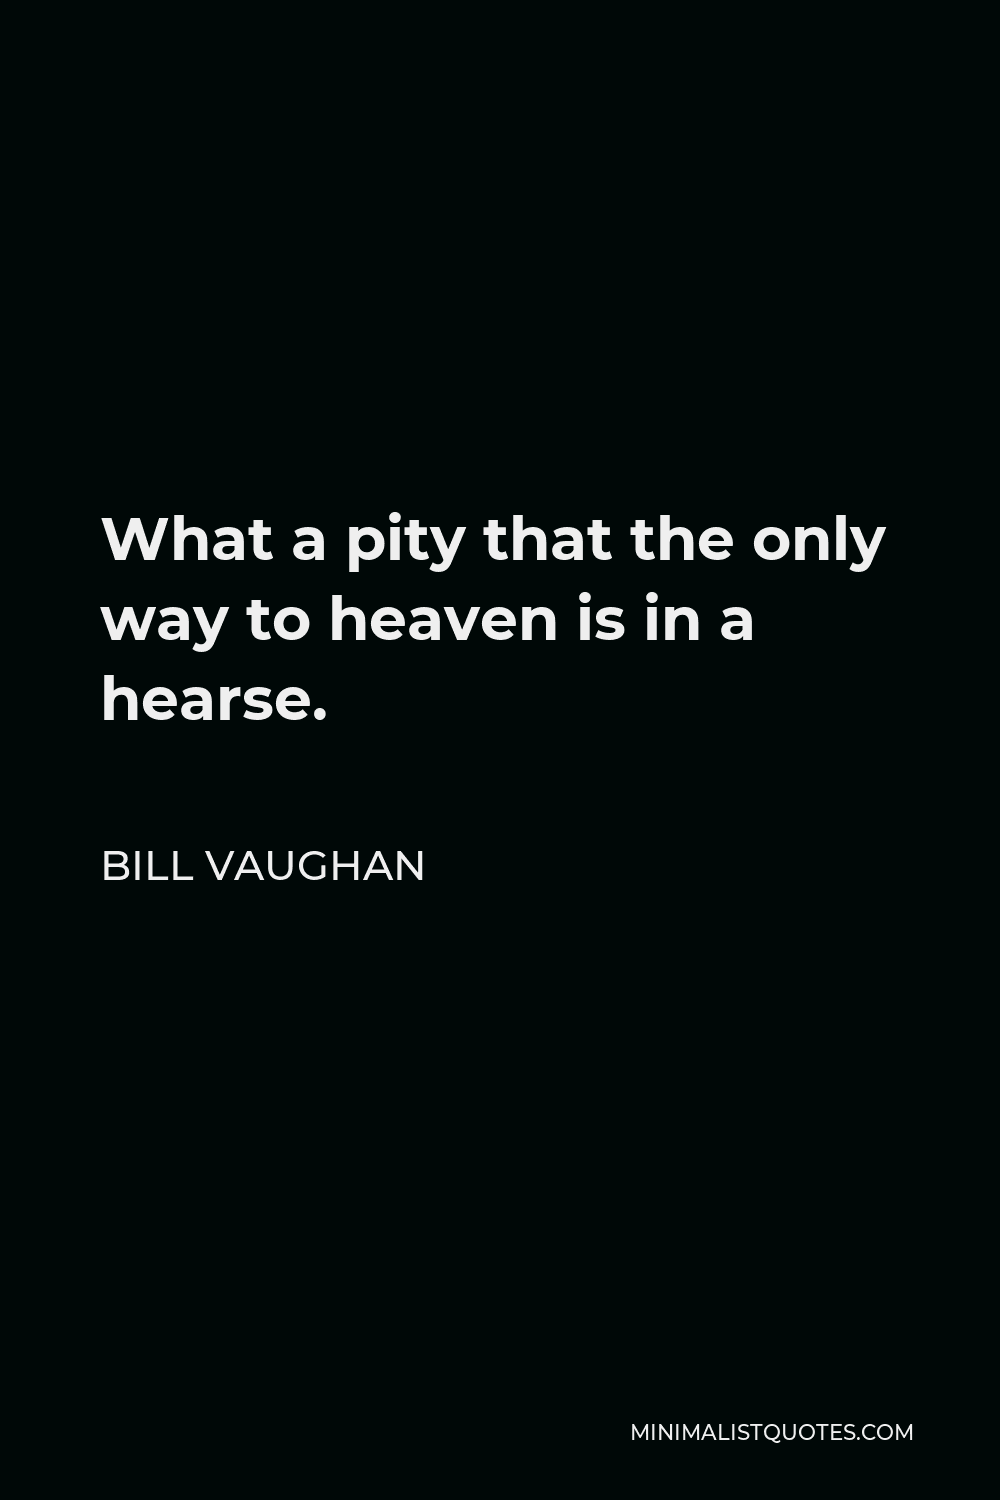 Bill Vaughan Quote - What a pity that the only way to heaven is in a hearse.